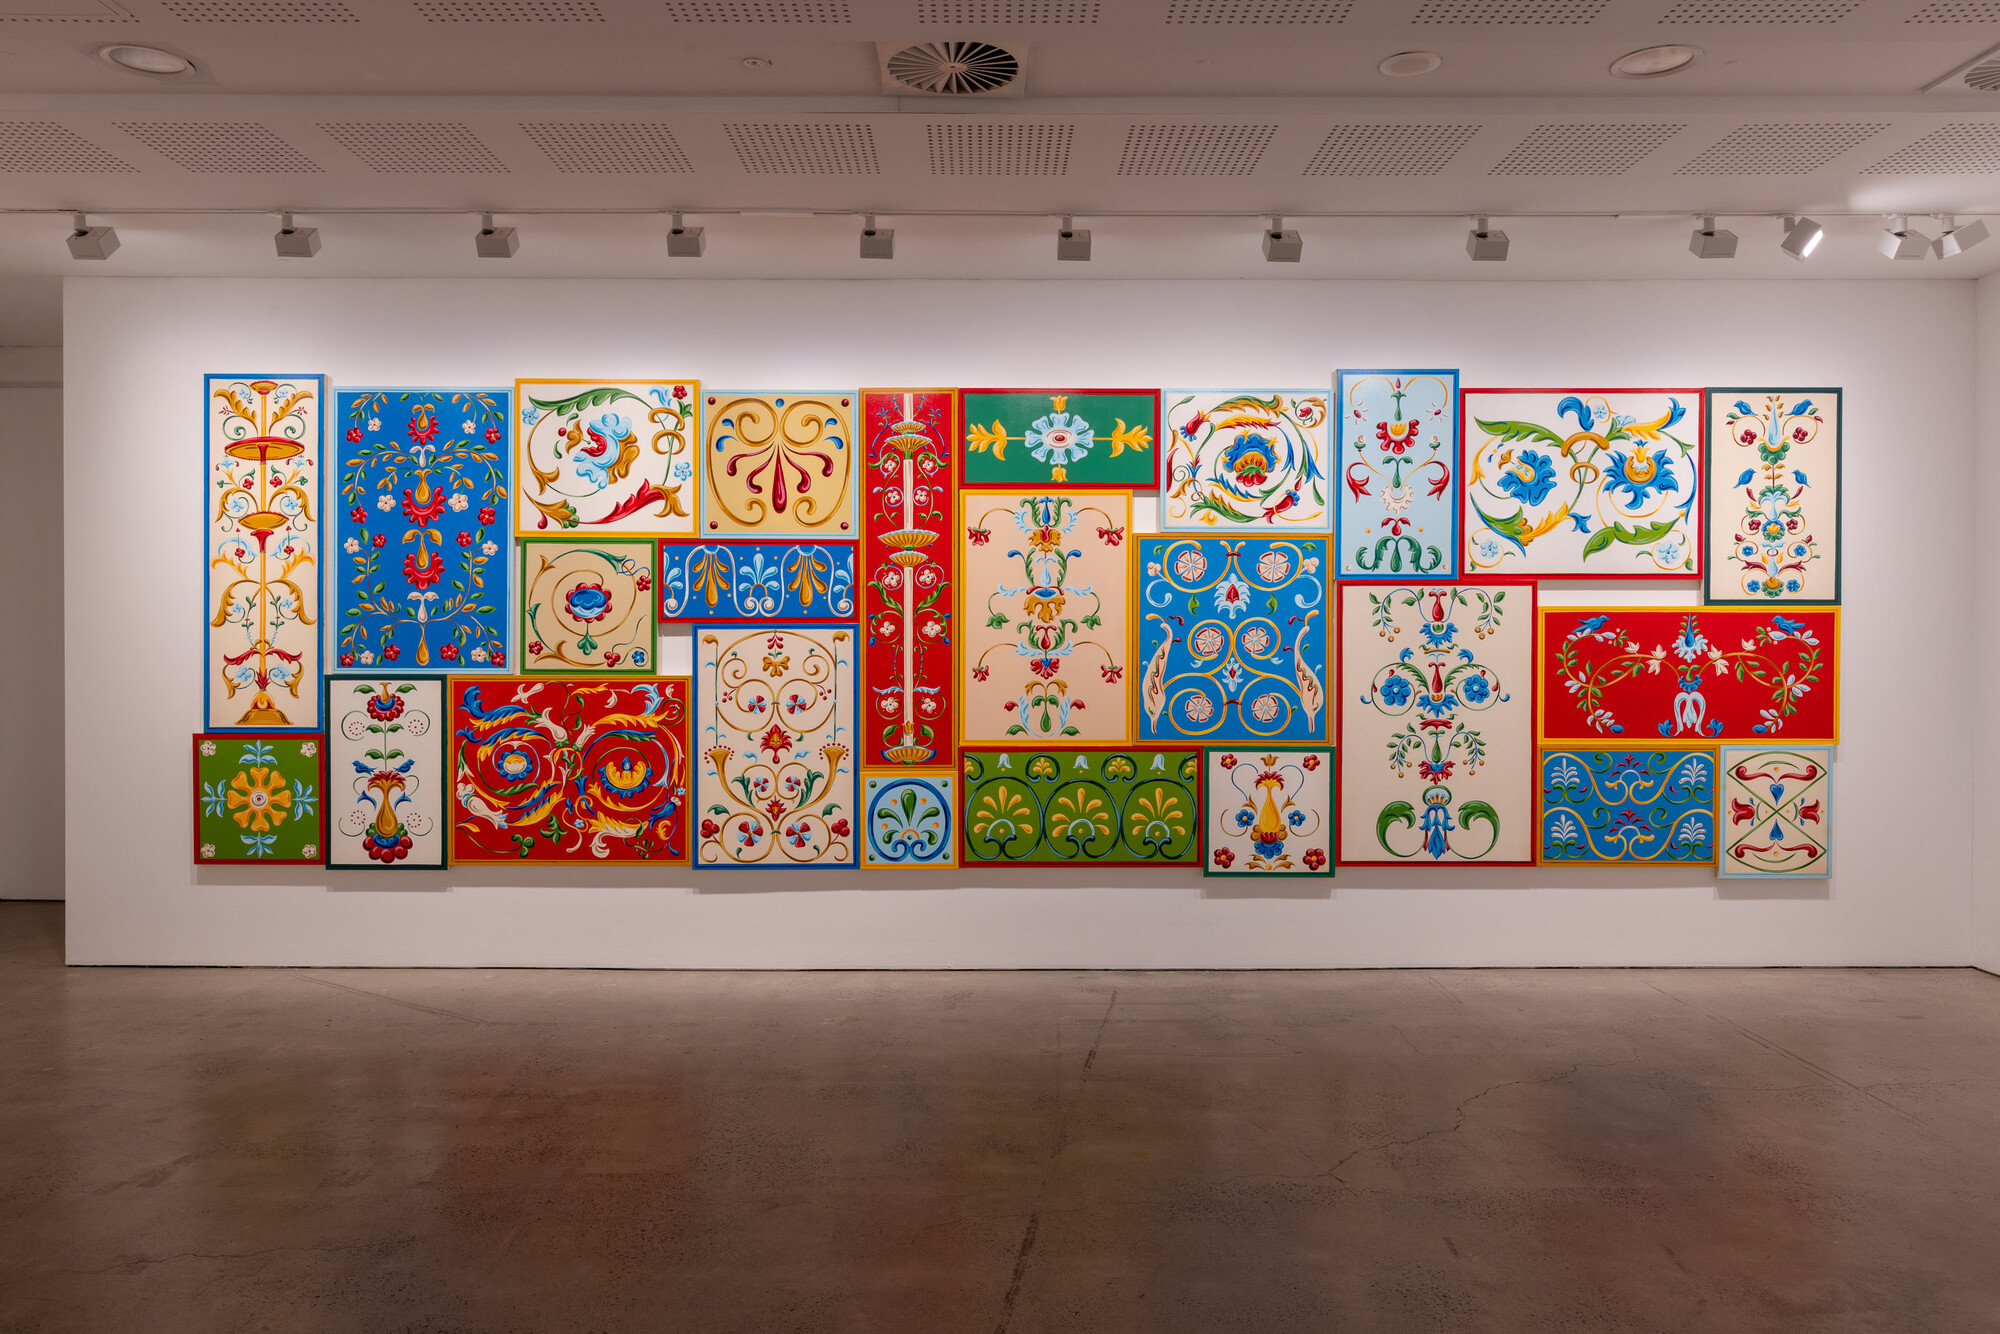 Elizabeth Pulie, <em>One hundred and twenty-five to One hundred and forty-nine (Decorated Wall)</em>, 1995, acrylic on canvas, 200 × 600cm. Photo: Daniel Boud